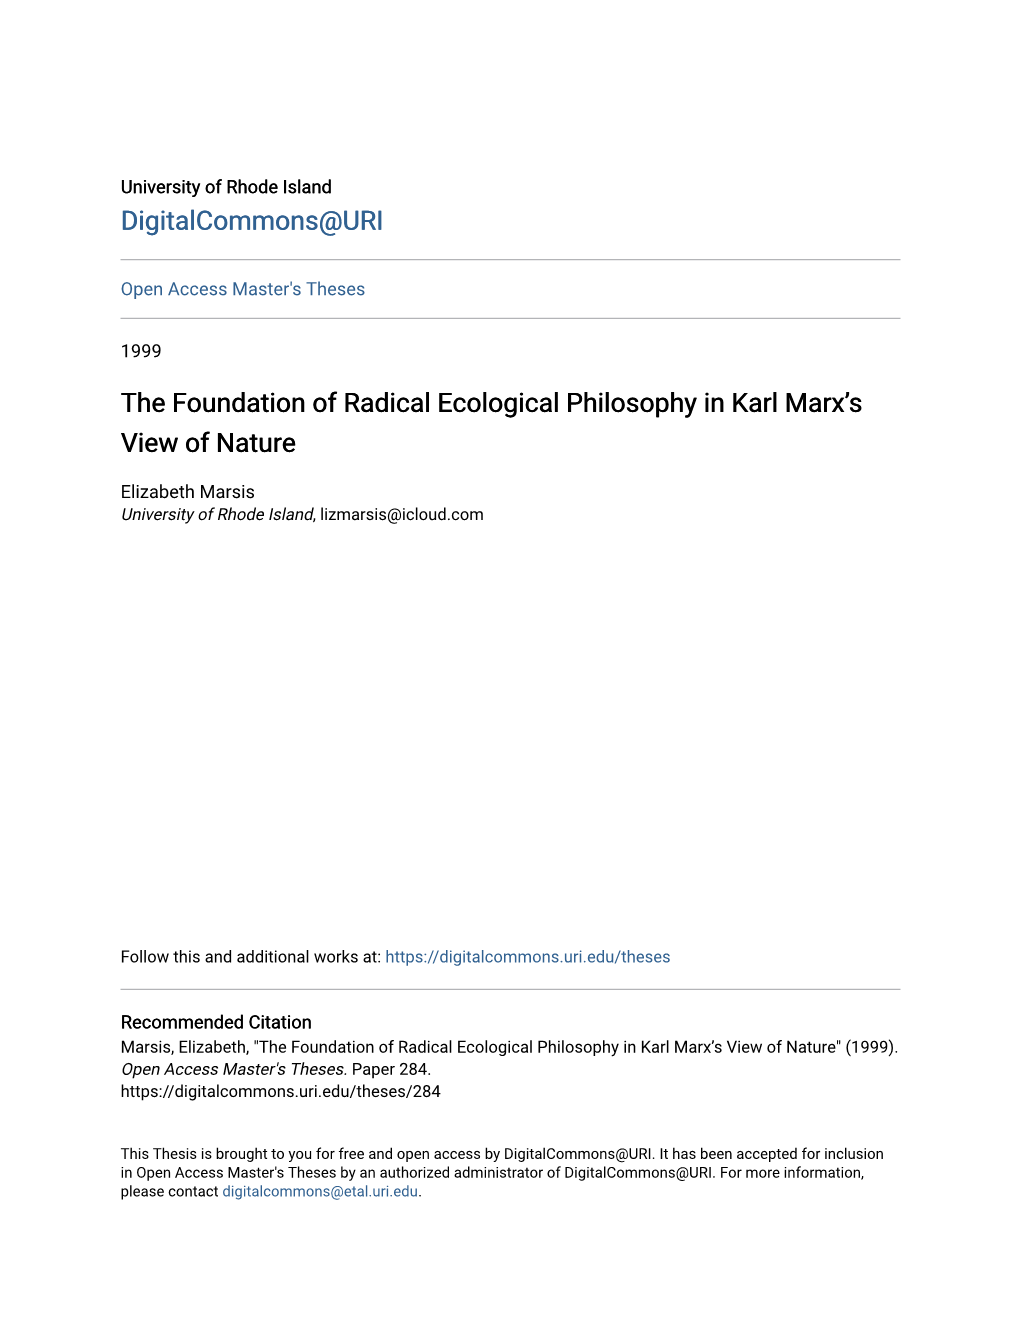 The Foundation of Radical Ecological Philosophy in Karl Marxâ•Žs View